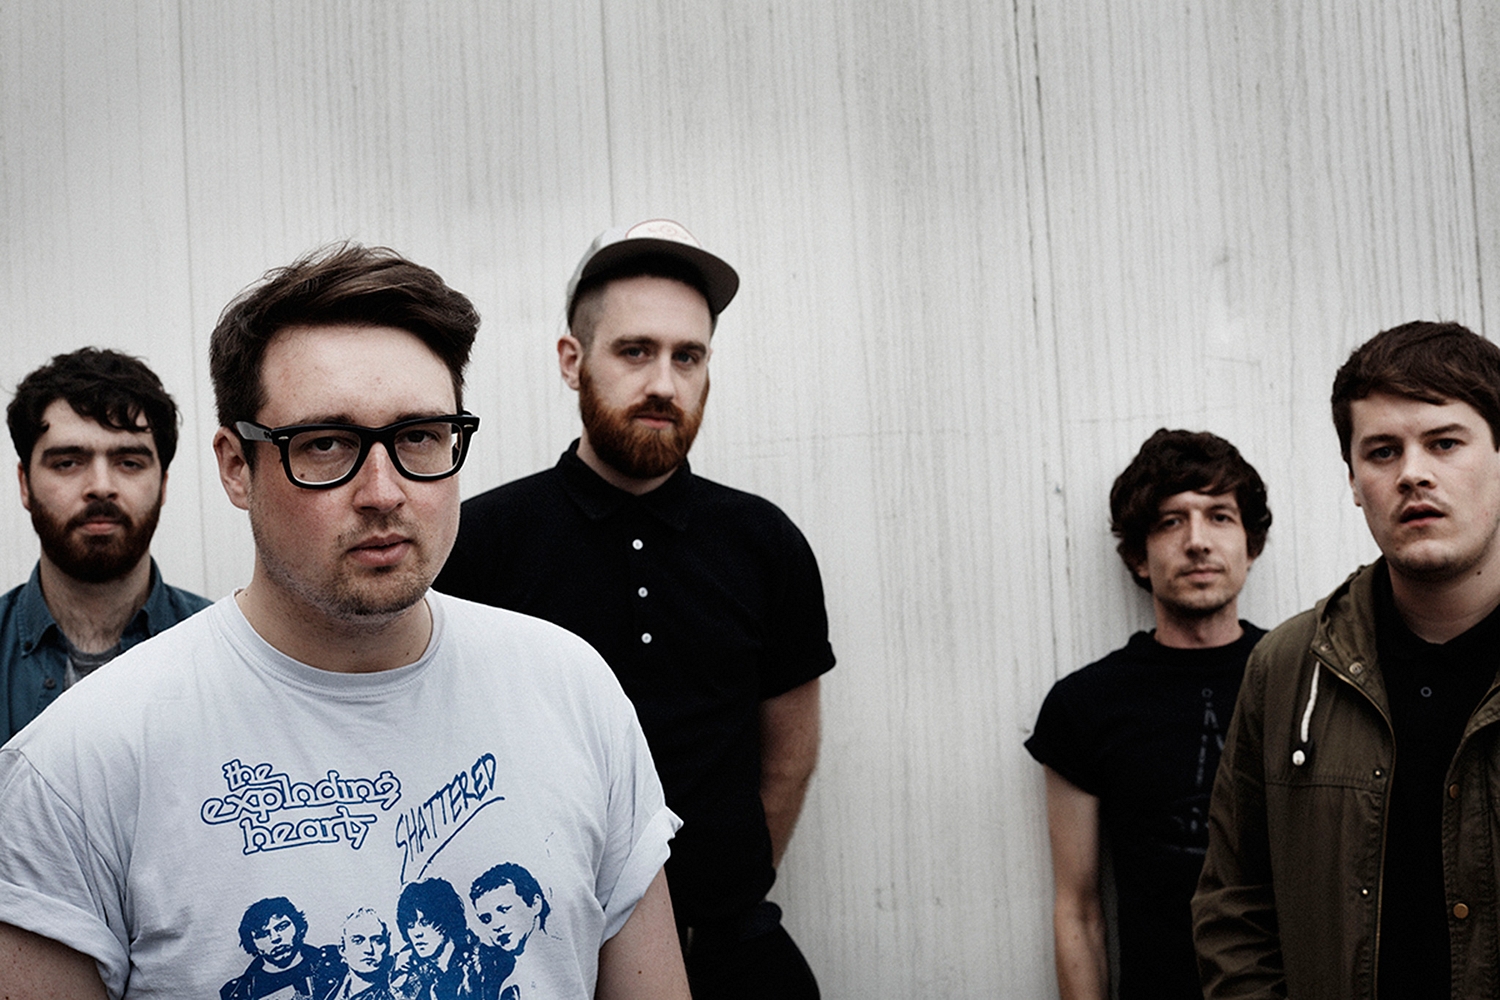 Hookworms: "We had a real problem after our first album"